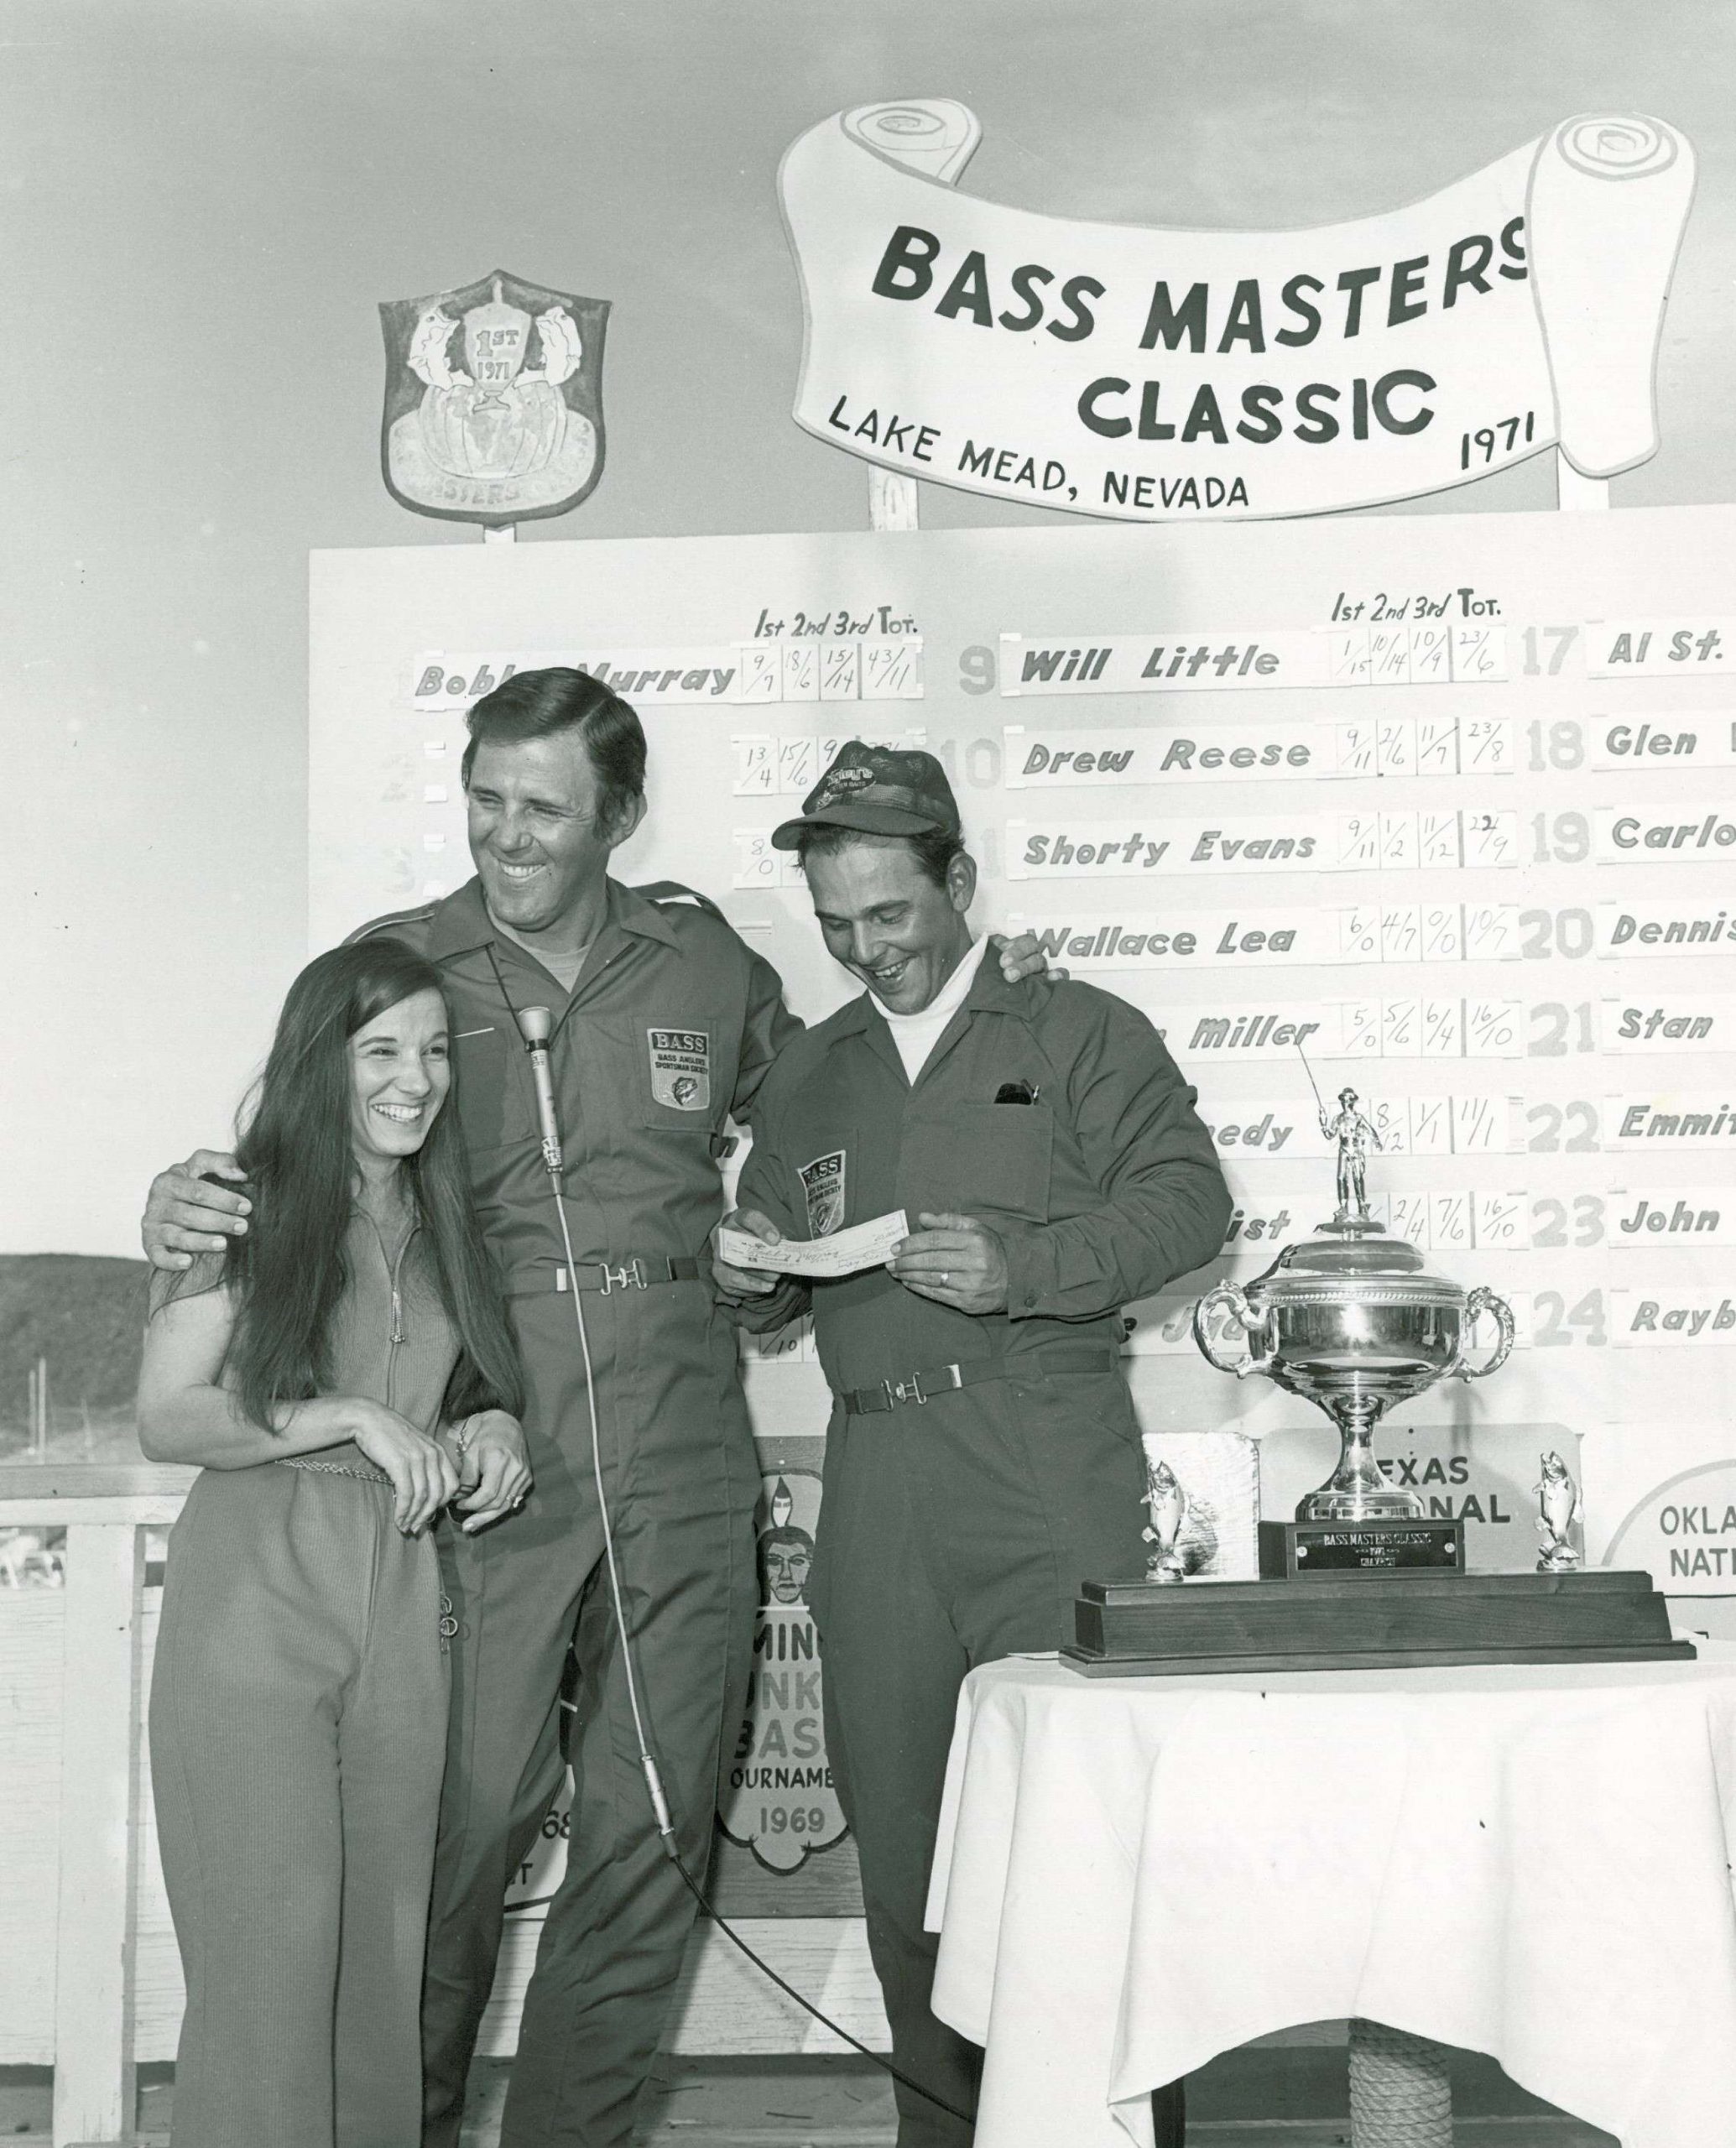 Only 16 months prior, Murray had been involved in a major head-on car crash, suffering serious injury to his legs. But he had bounced back, and he was able to take bass fishing's first big championship.